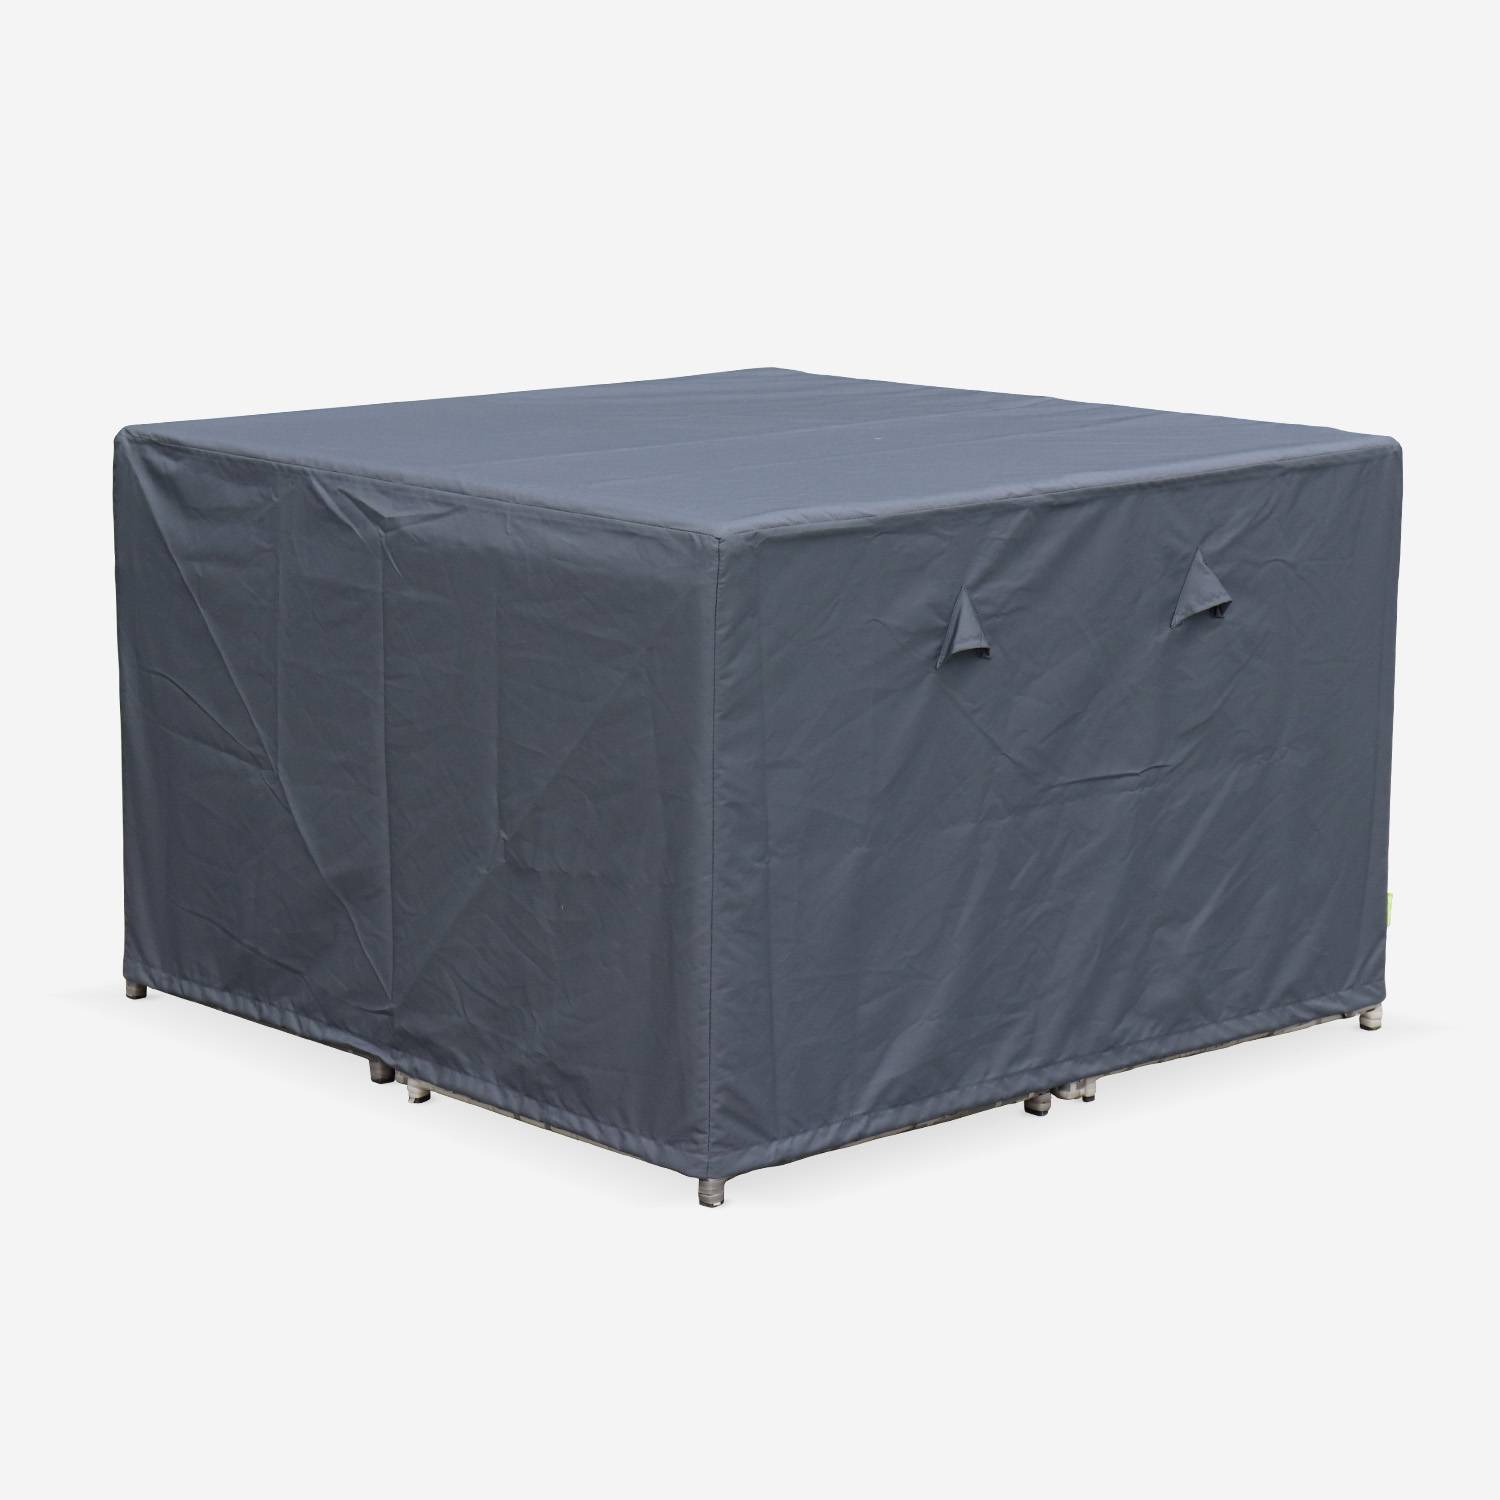 112x112cm dark grey dust cover - Square, PA-coated polyester dust cover for the Vabo 8 garden table Photo1